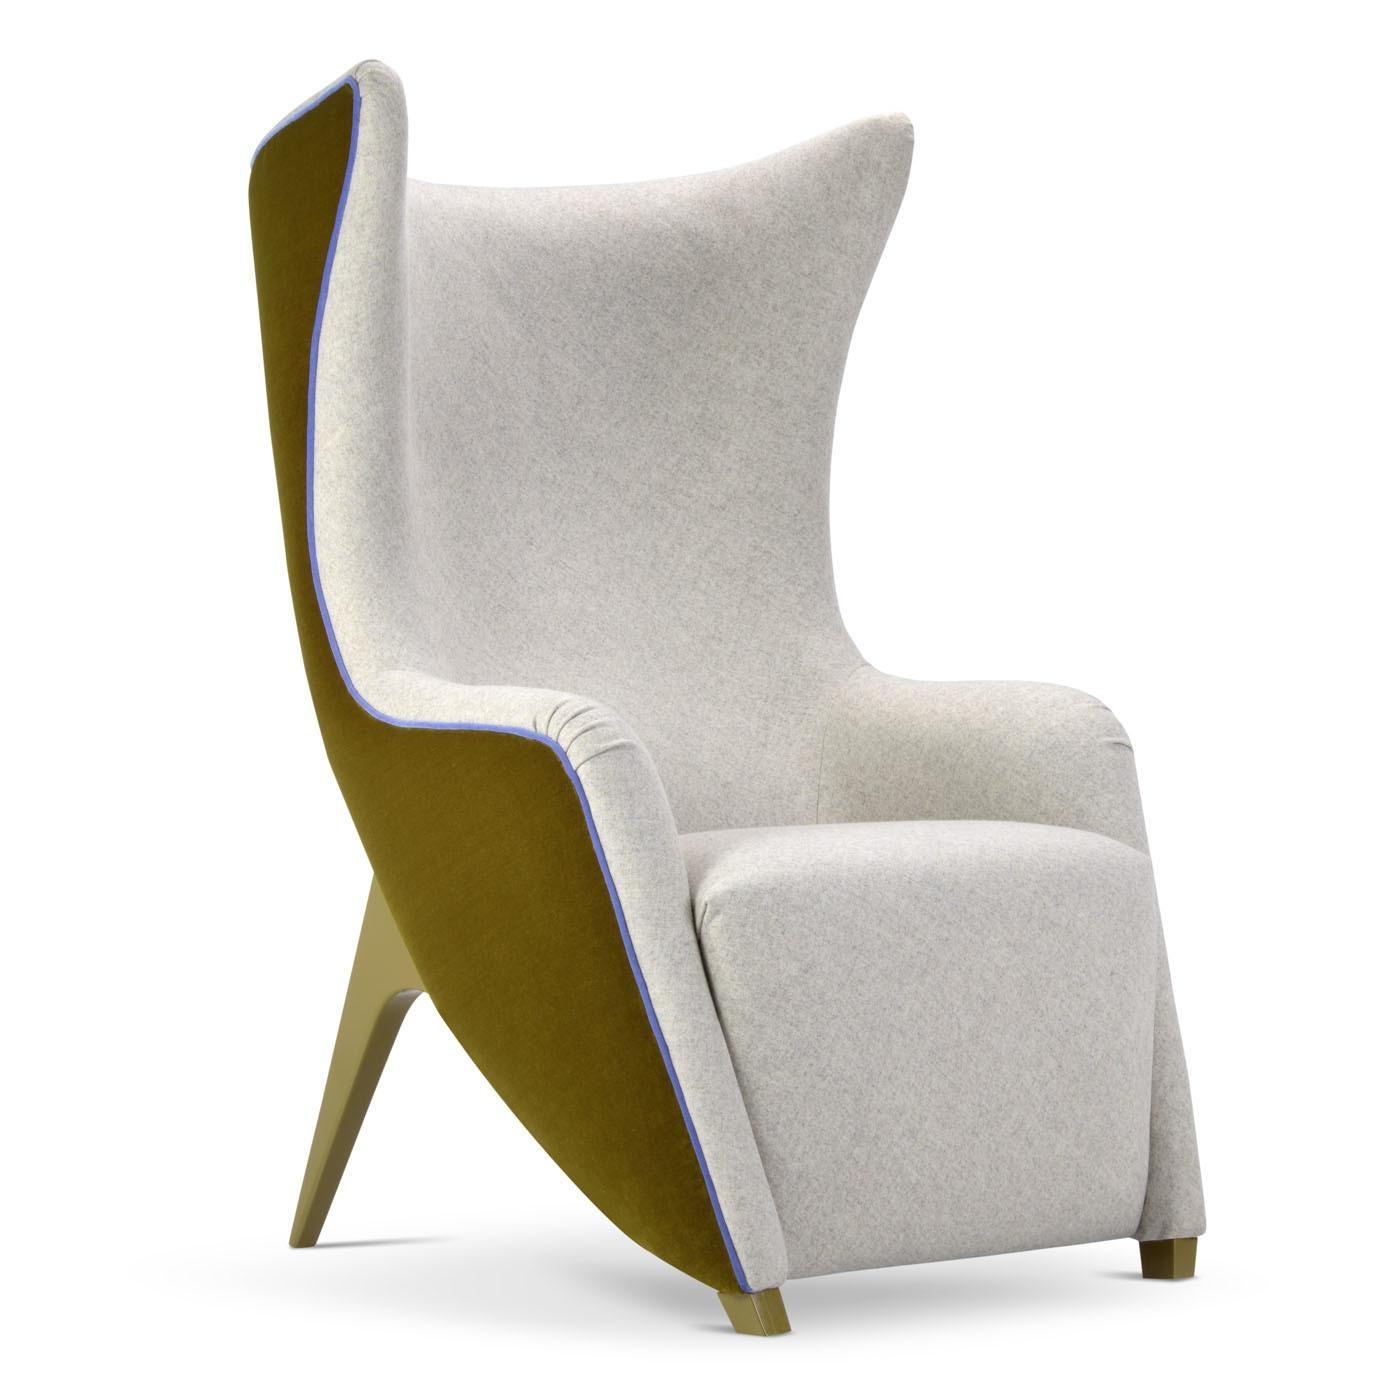 The armchair with wings returns with a futuristic look and cabriole legs, available in various types of wood. With a slender and enveloping form, the color is customizable with a choice of white, yellow, orange, red, purple, pink, gray, pale blue,